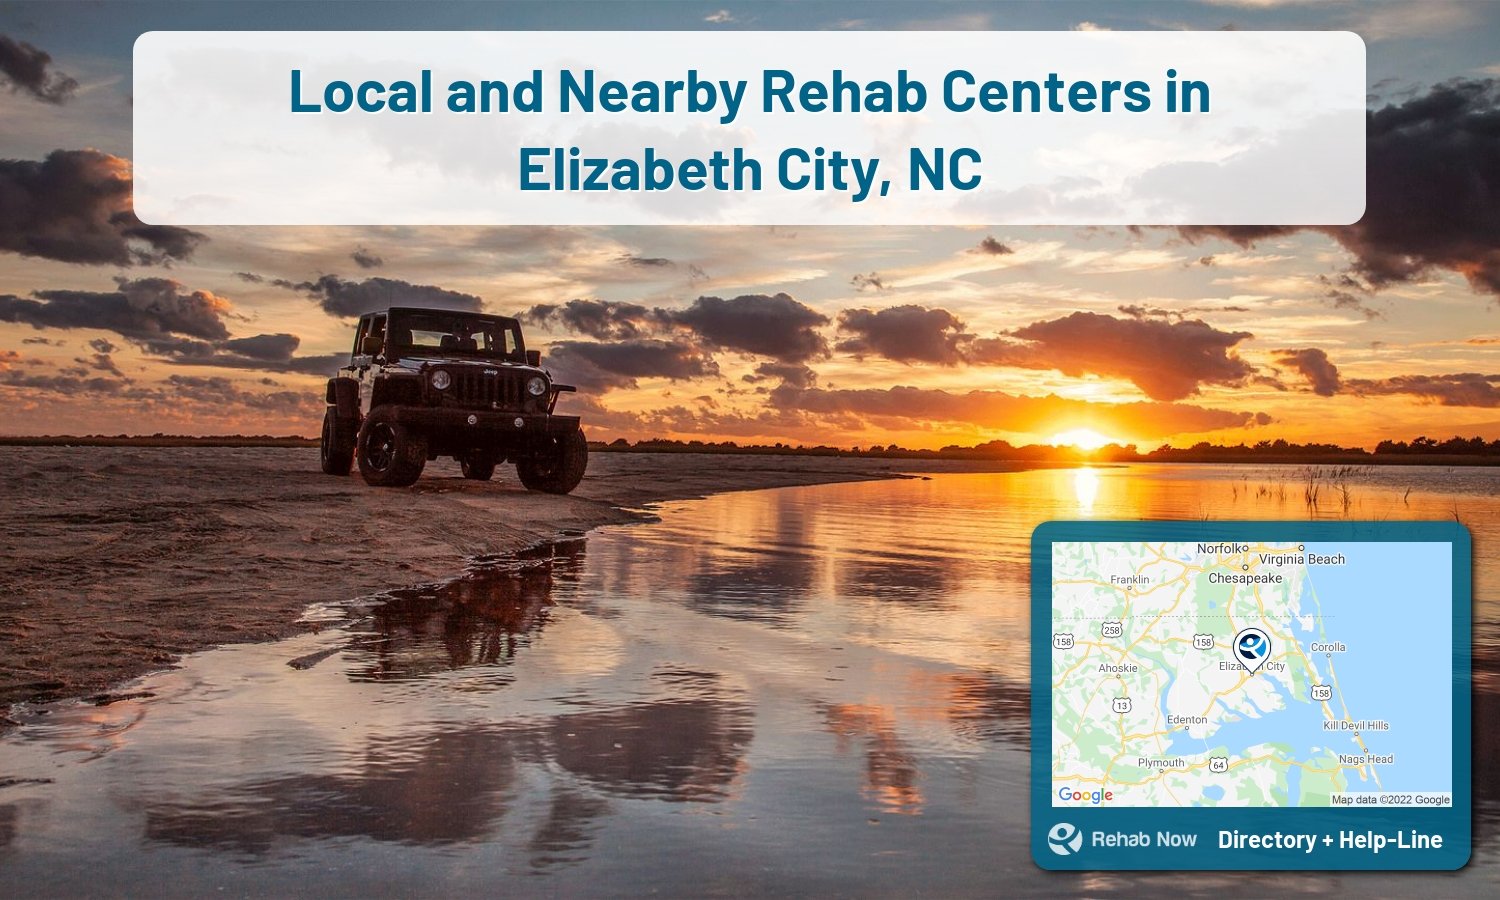 View options, availability, treatment methods, and more, for drug rehab and alcohol treatment in Elizabeth City, North Carolina